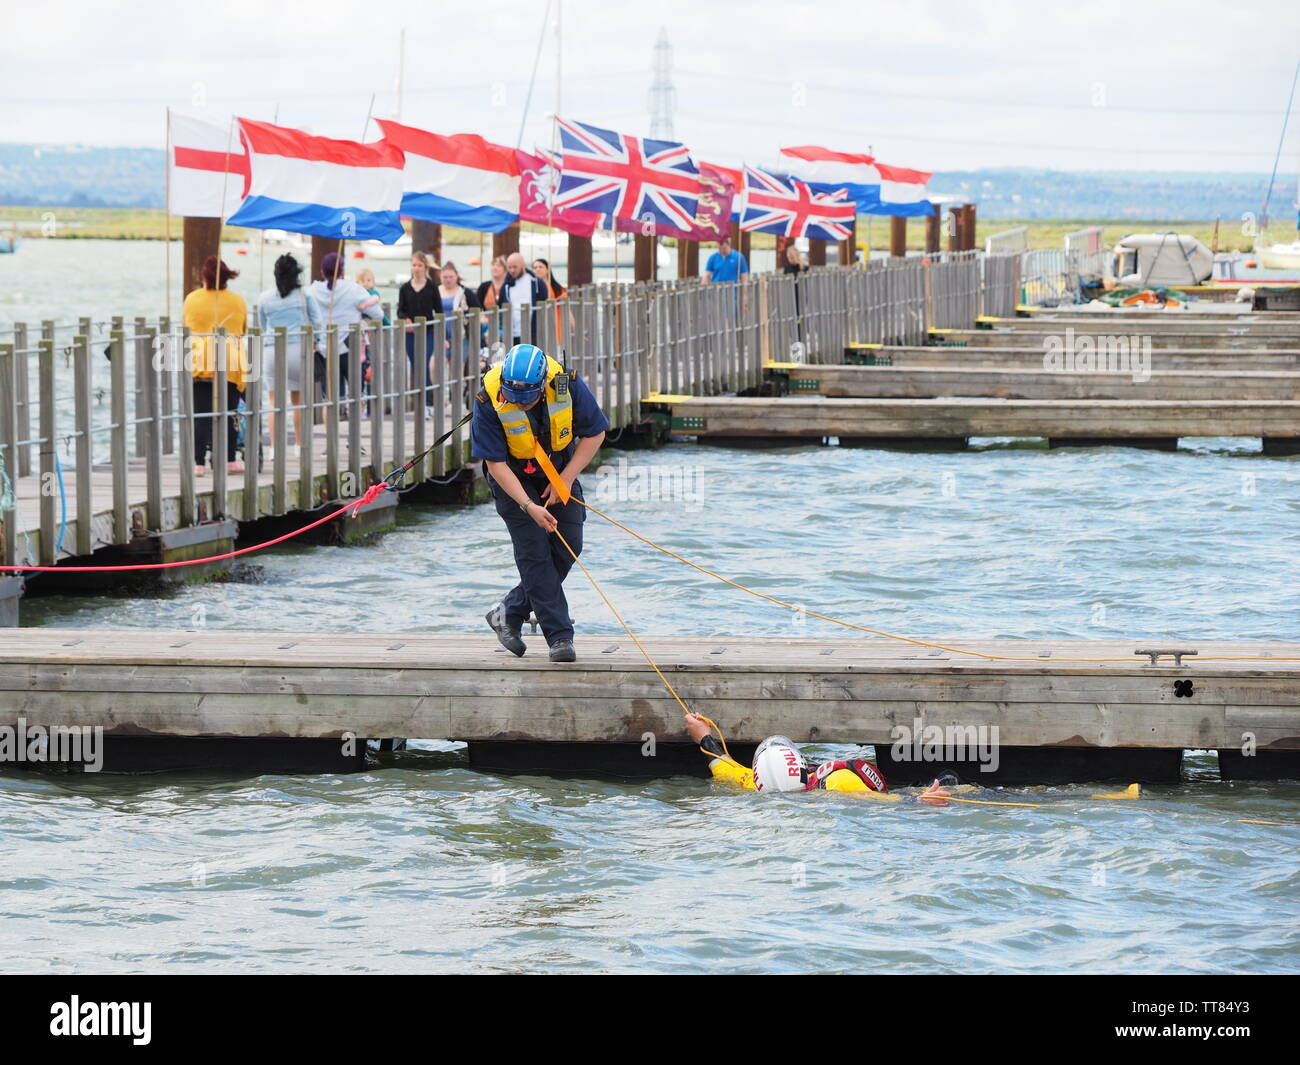 Queenborough, Kent, UK. 15th June, 2019. Sheerness RNLI held an Open Day in Queenborough Habour, Kent this day with various demonstrations. A volunteer is rescued from the water using a throw line from a Coastguard officer. Credit: James Bell/Alamy Live News Stock Photo